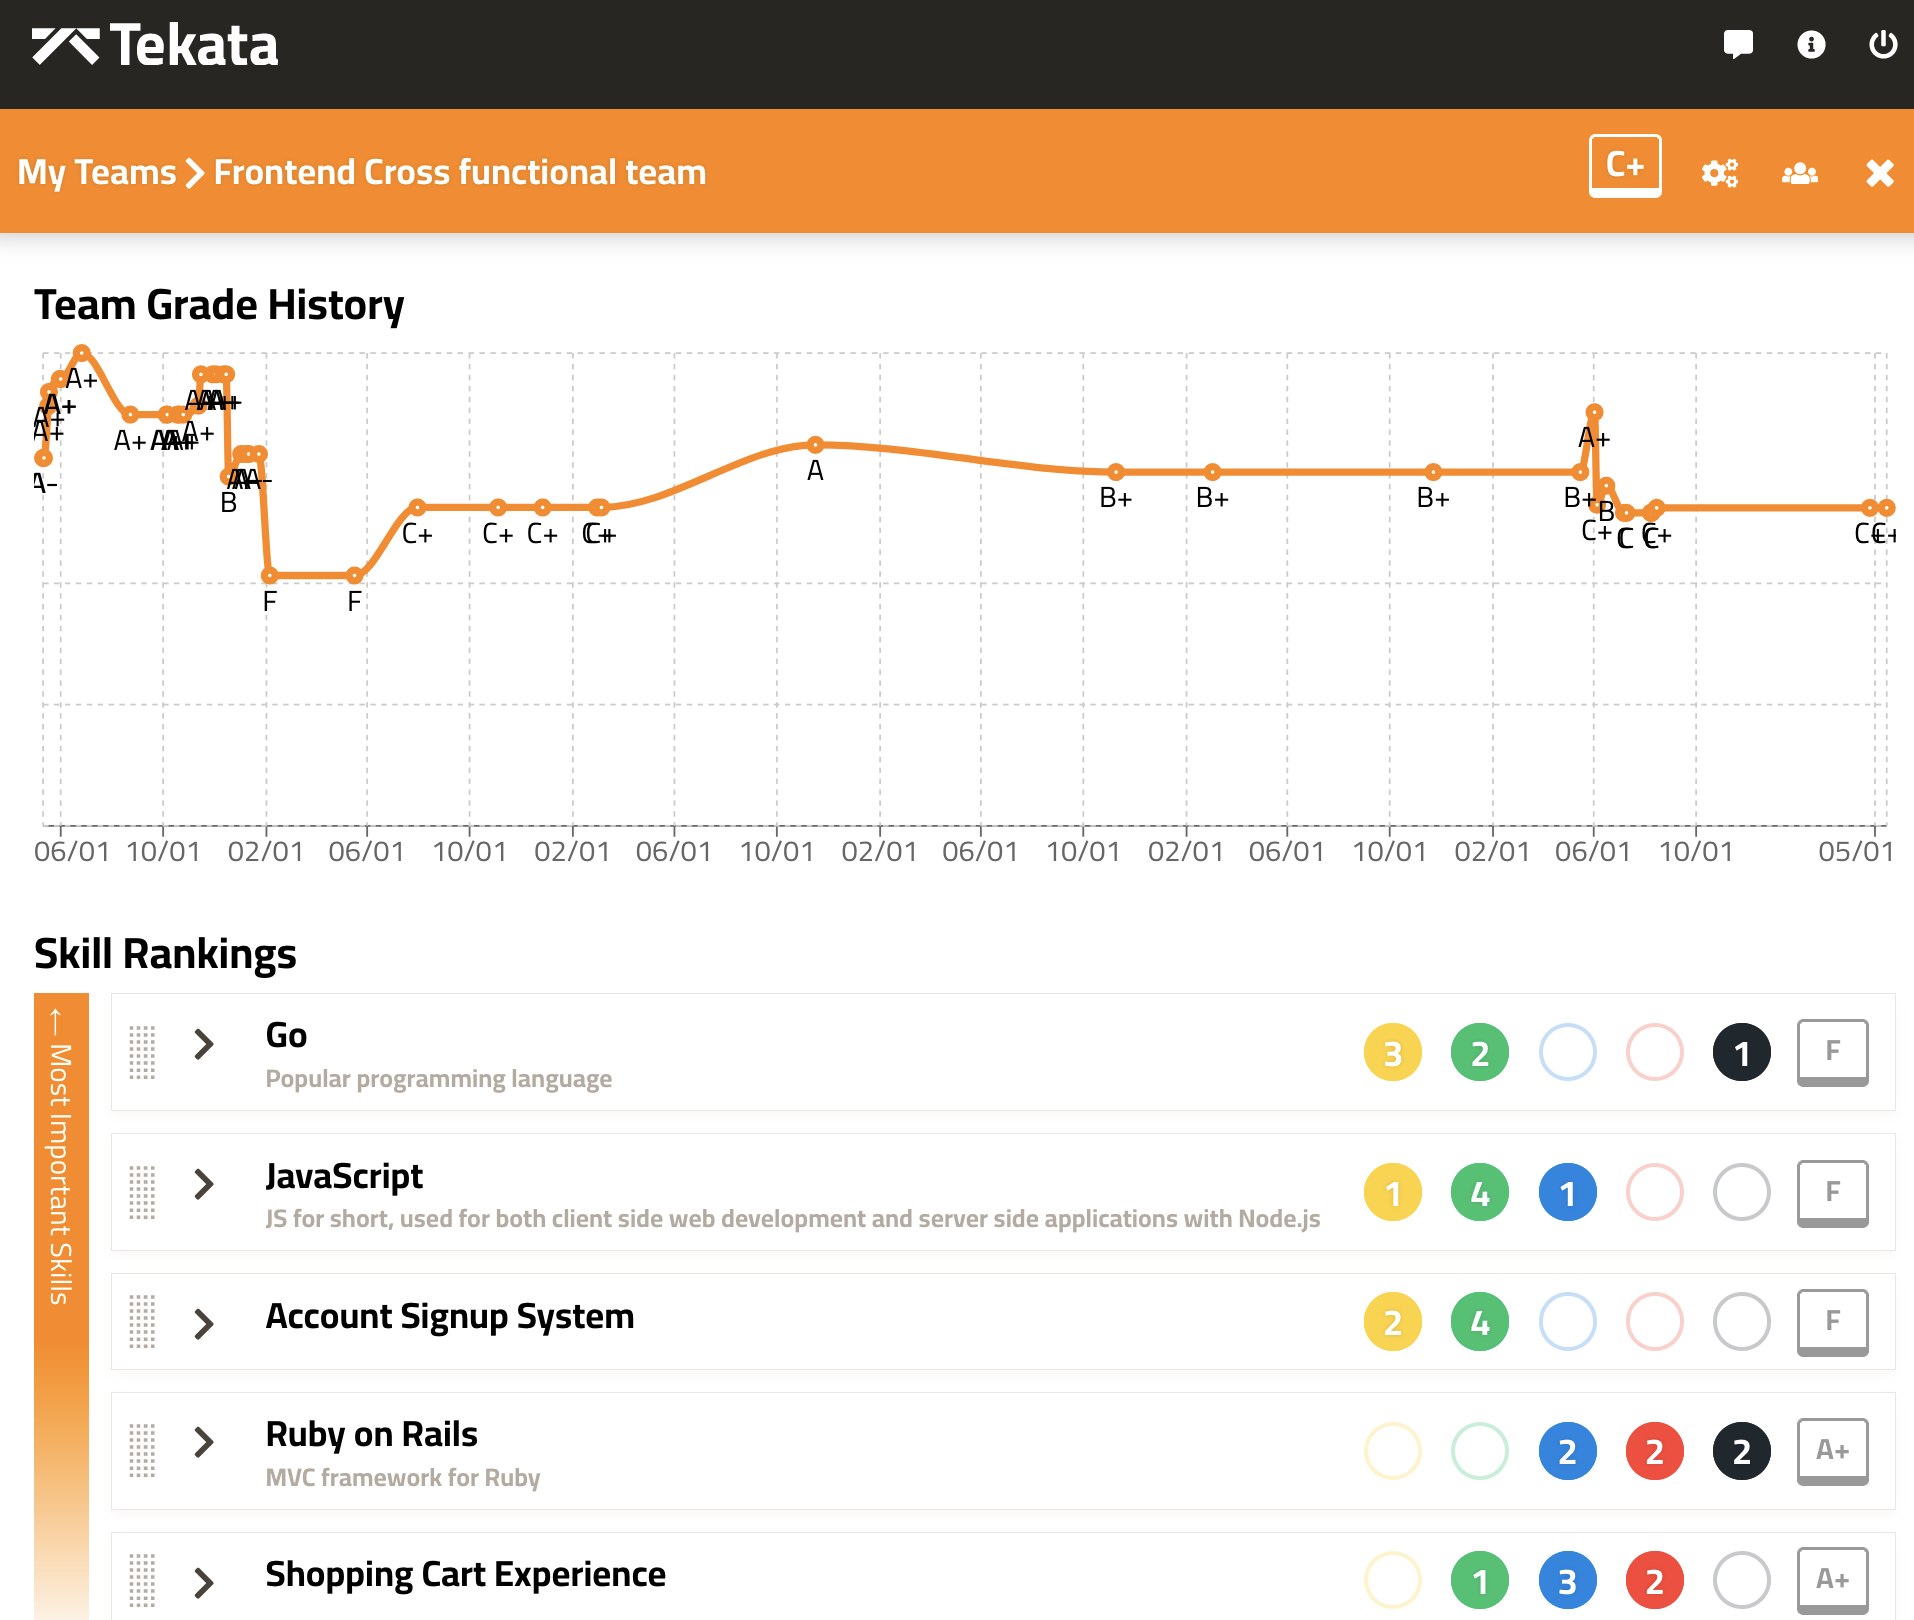 screenshot of tekata.io application showing list of skills and how well covered the team is for each one